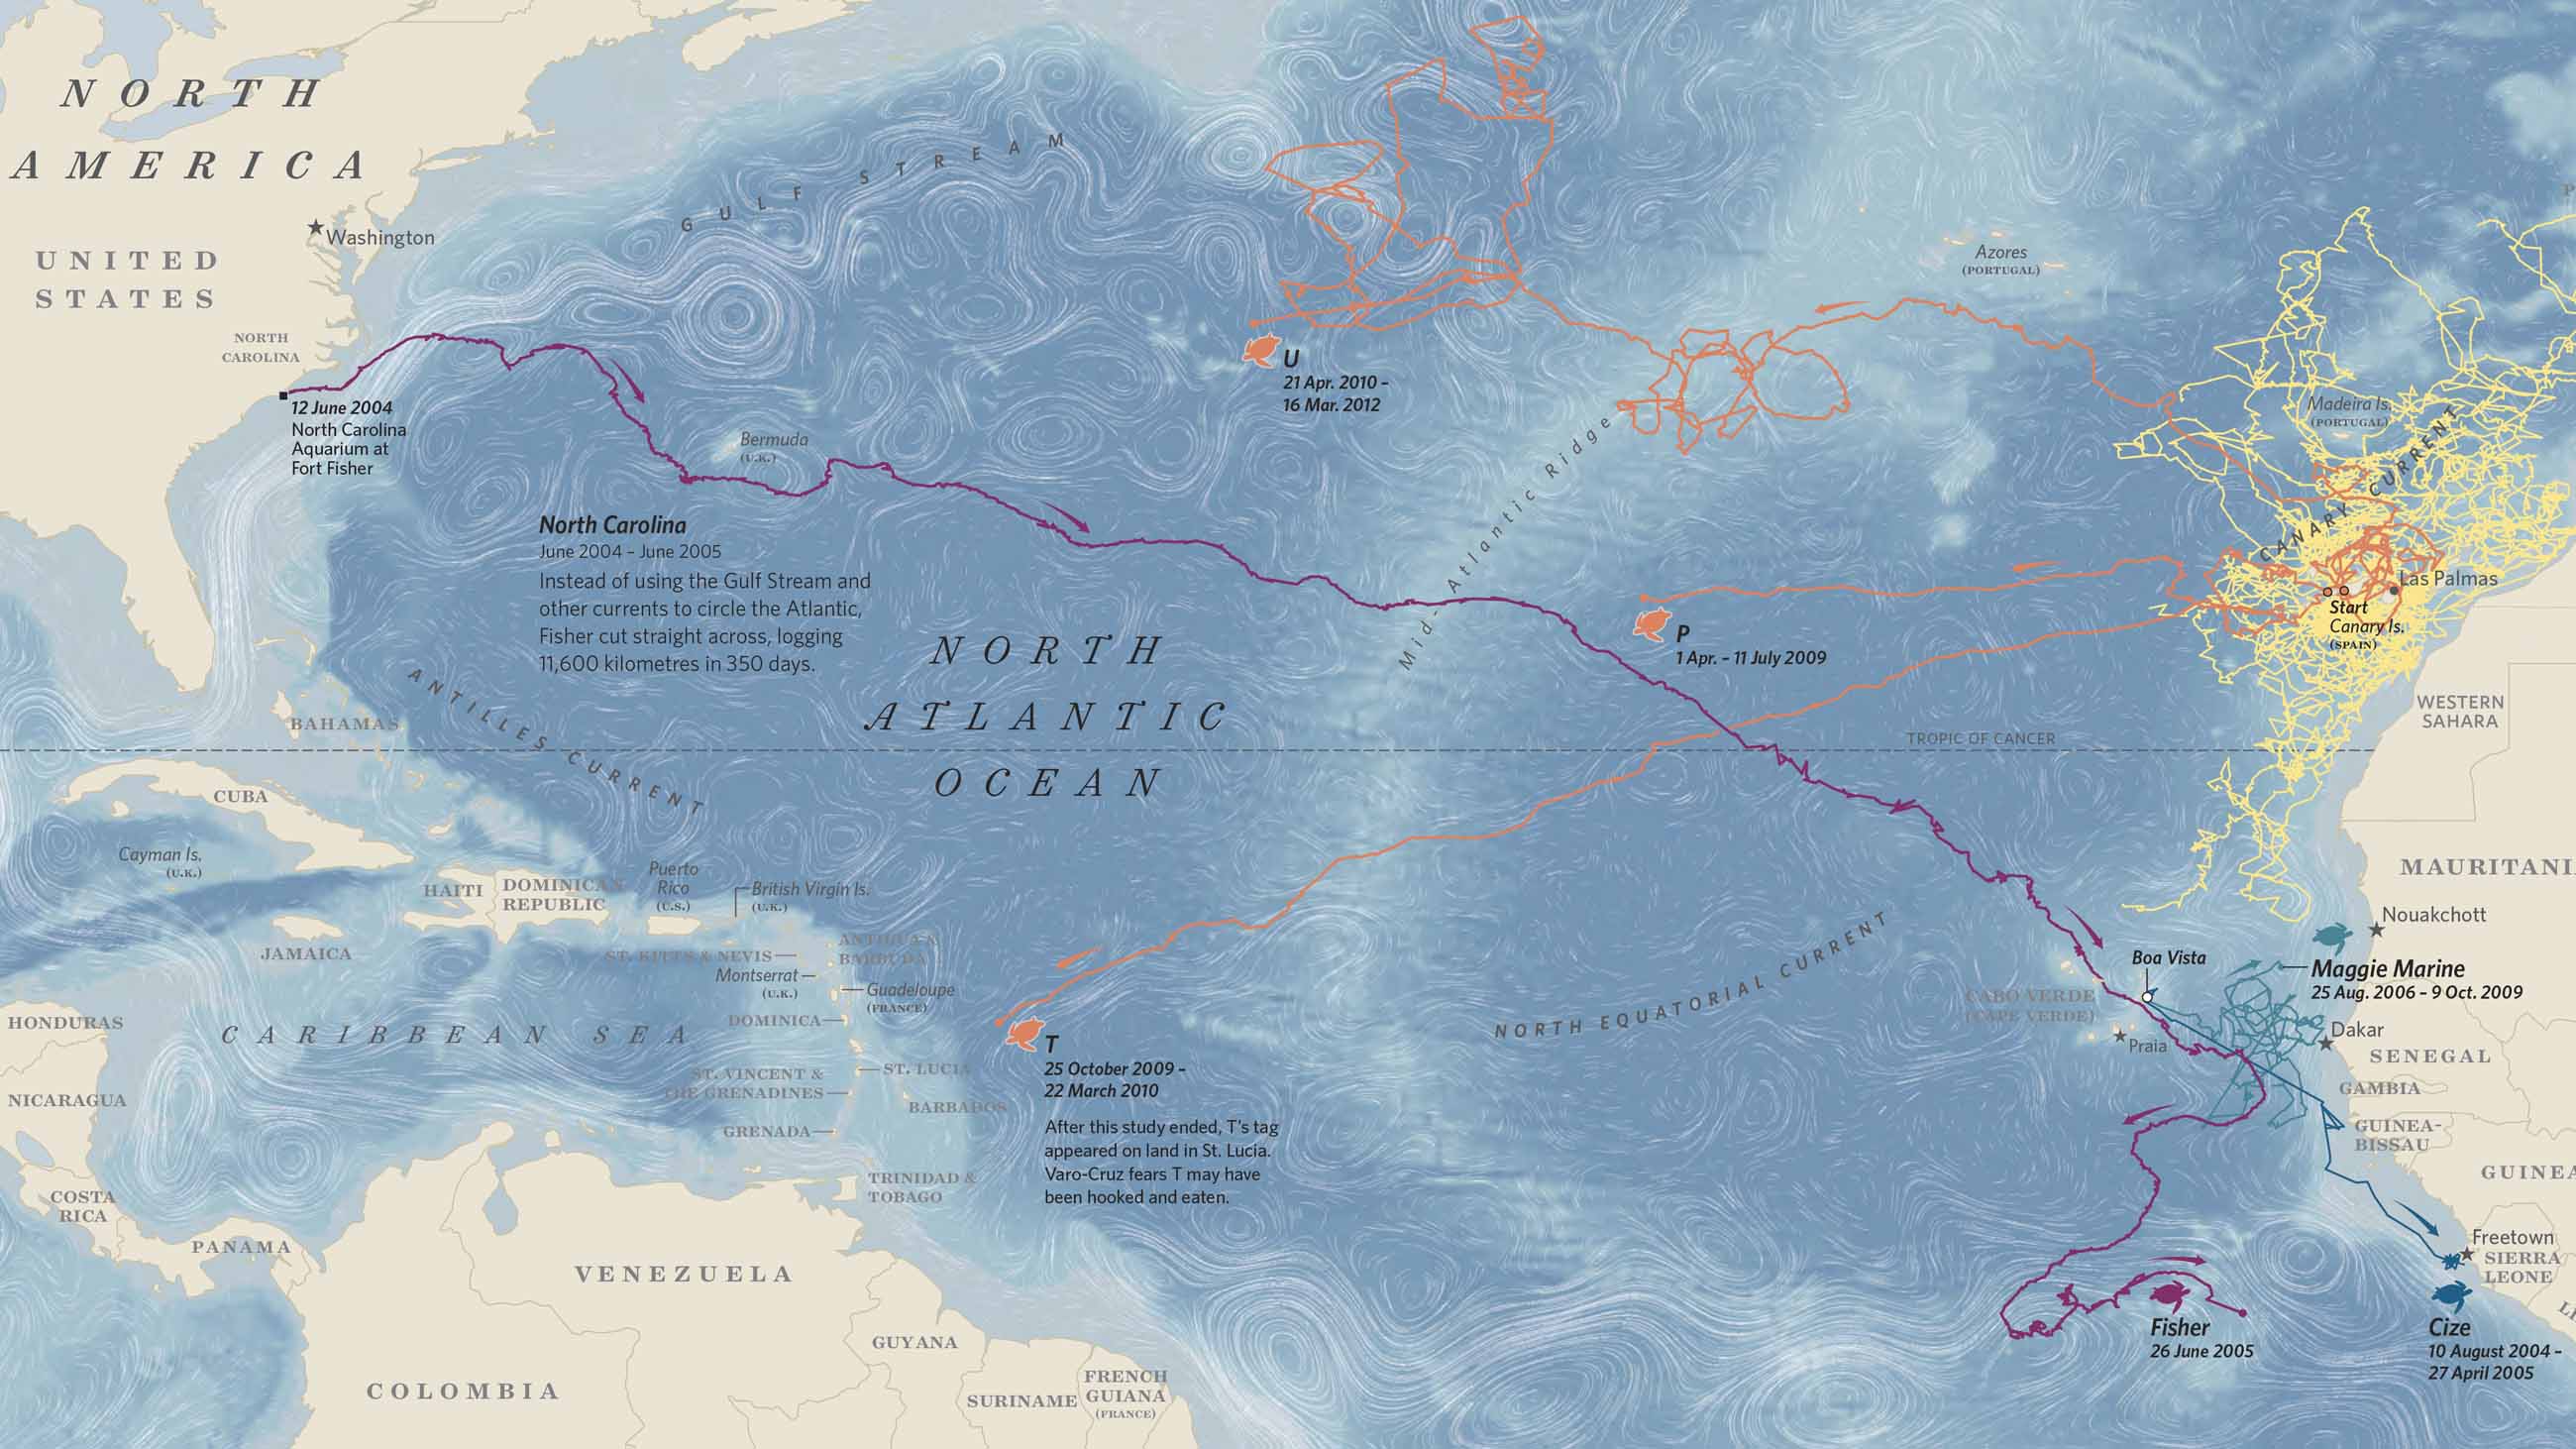 A detail from a larger map in "Where the Animals Go," showing the Atlantic journeys of several loggerhead turtles.